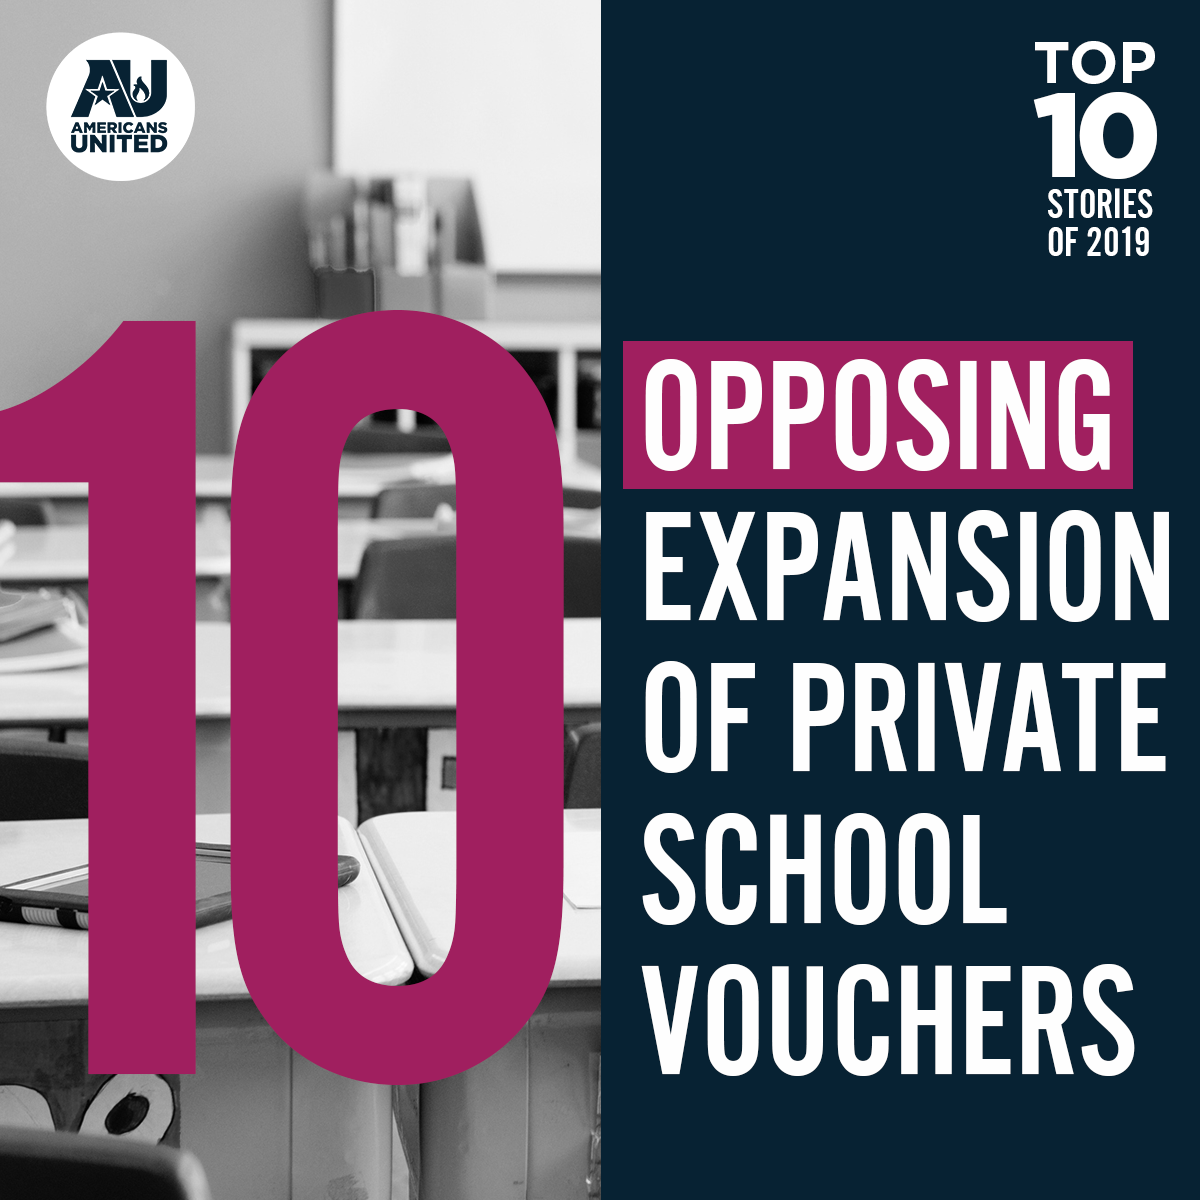 No. 10: Opposing Expansion Of Private School Vouchers